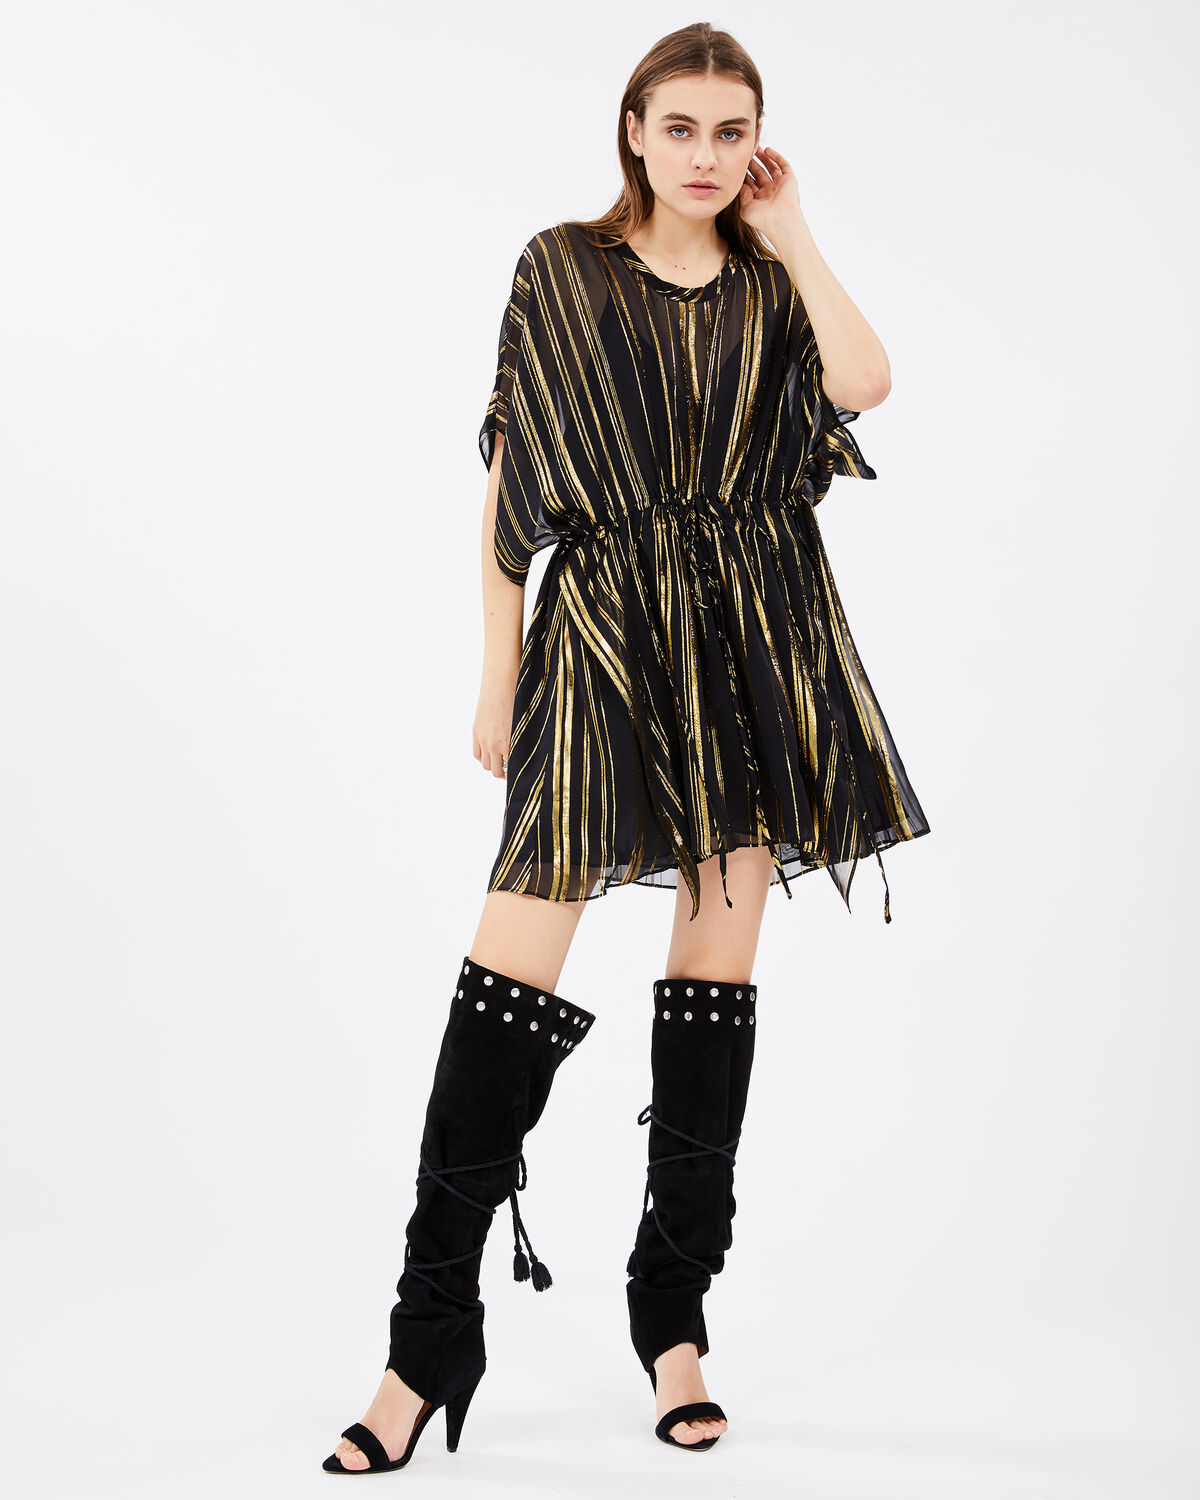 Photo of IRO Paris Enhance Dress Black And Gold - Tightenable At The Waist With Its Golden Stripes, This Dress Is Perfect For Your Summer Evenings. Fluid And Lightweight, Wear It With Boots To Add A Rock Touch To Your Outfits. Dresses